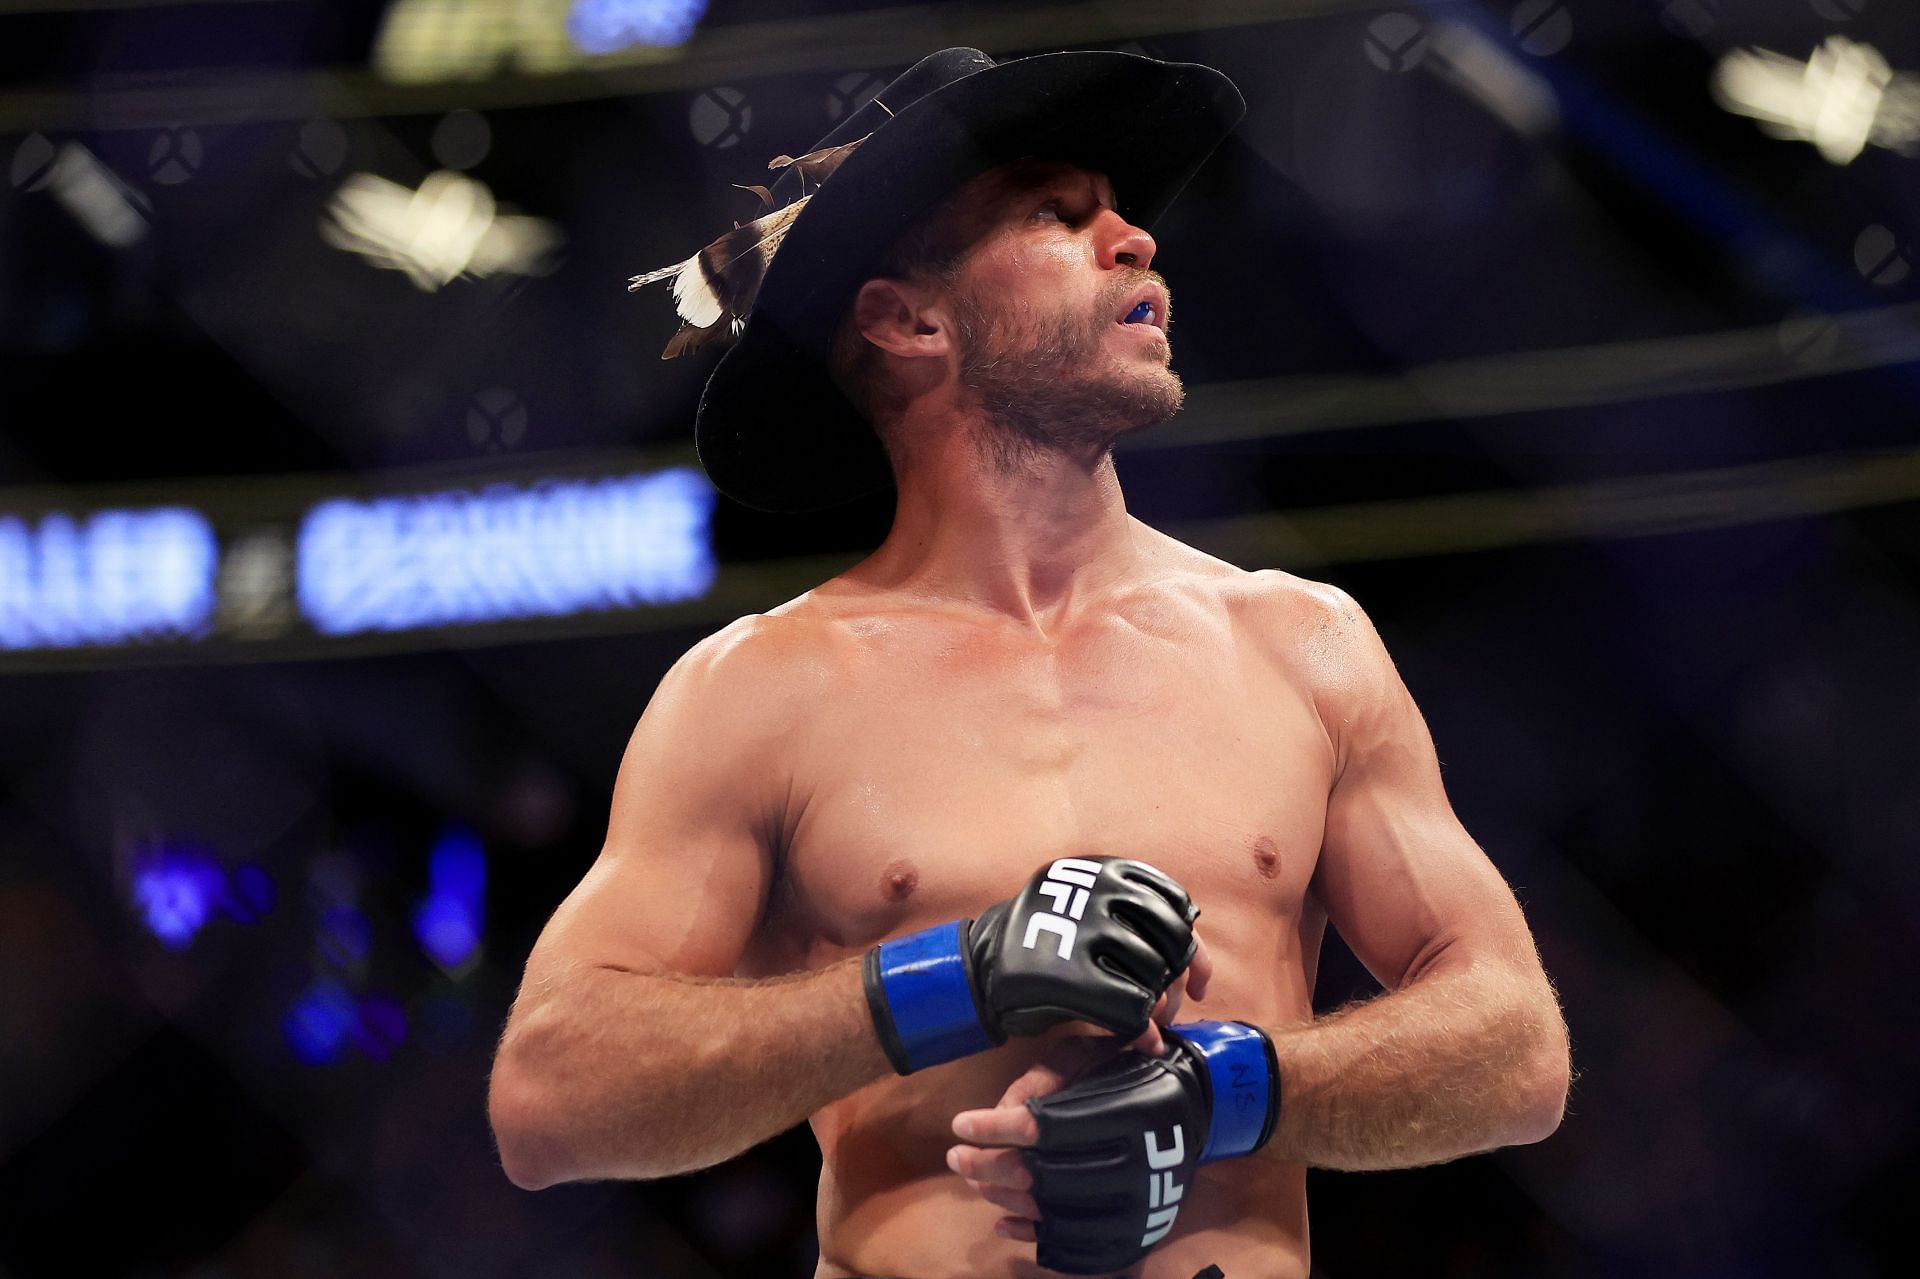 In his prime, Donald Cerrone was the most exciting fighter in MMA